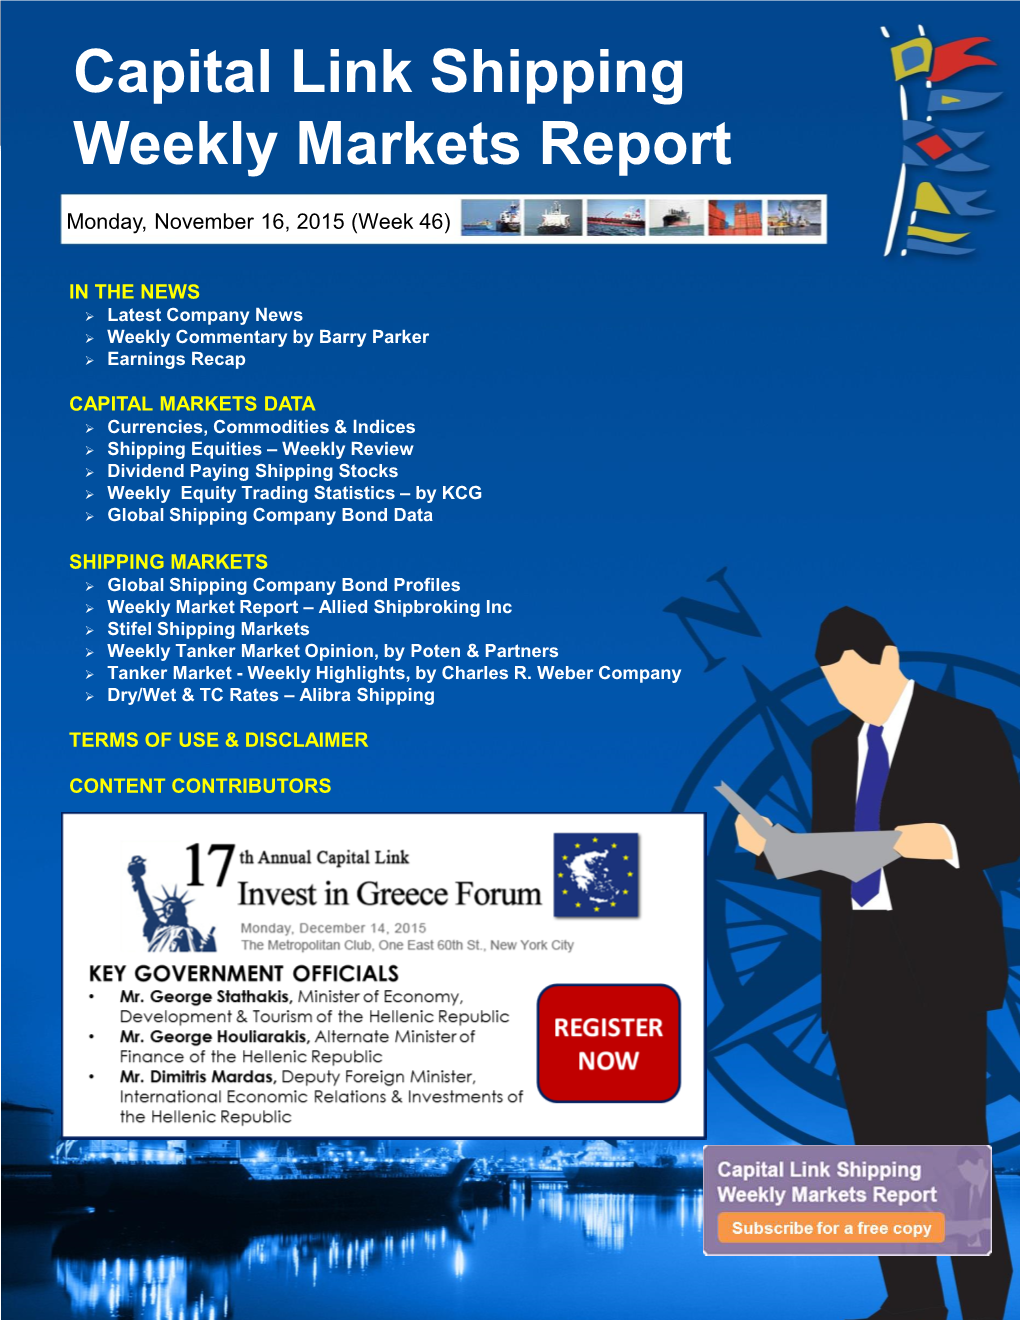 Capital Link Shipping Weekly Markets Report